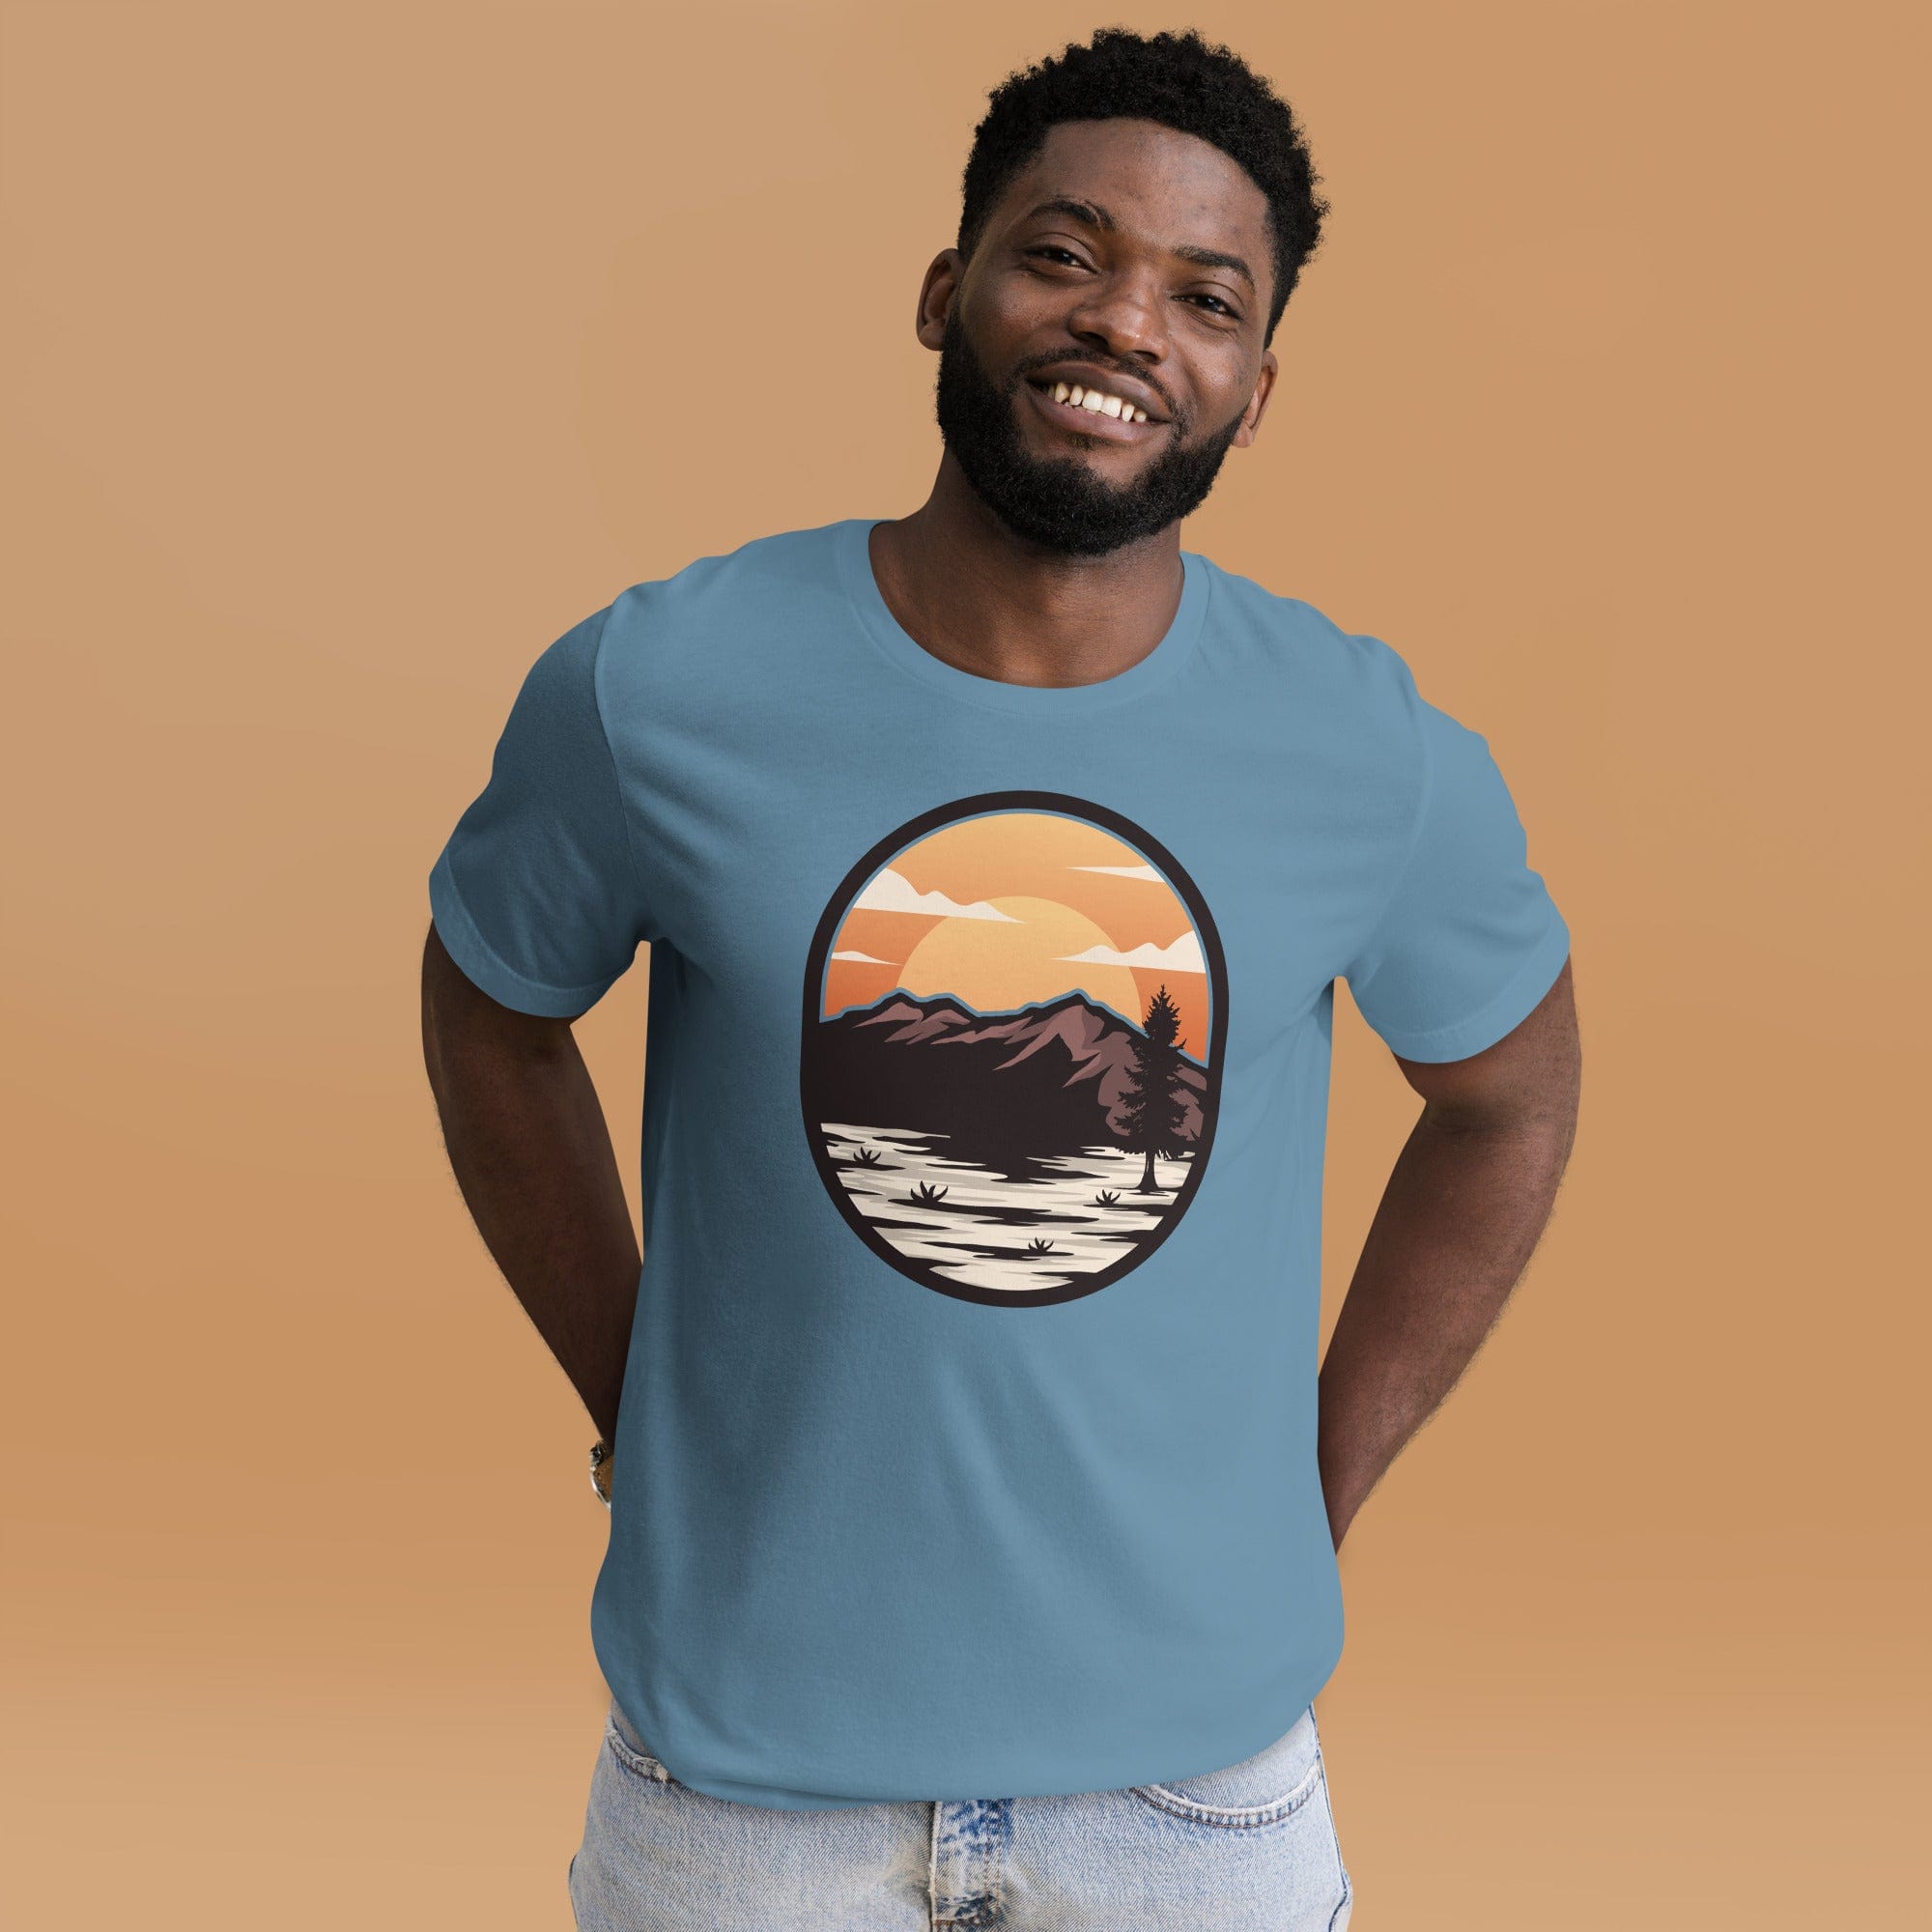 Spruced Roost Sun, Sky and Sea - Unisex t-shirt - XS-5XL